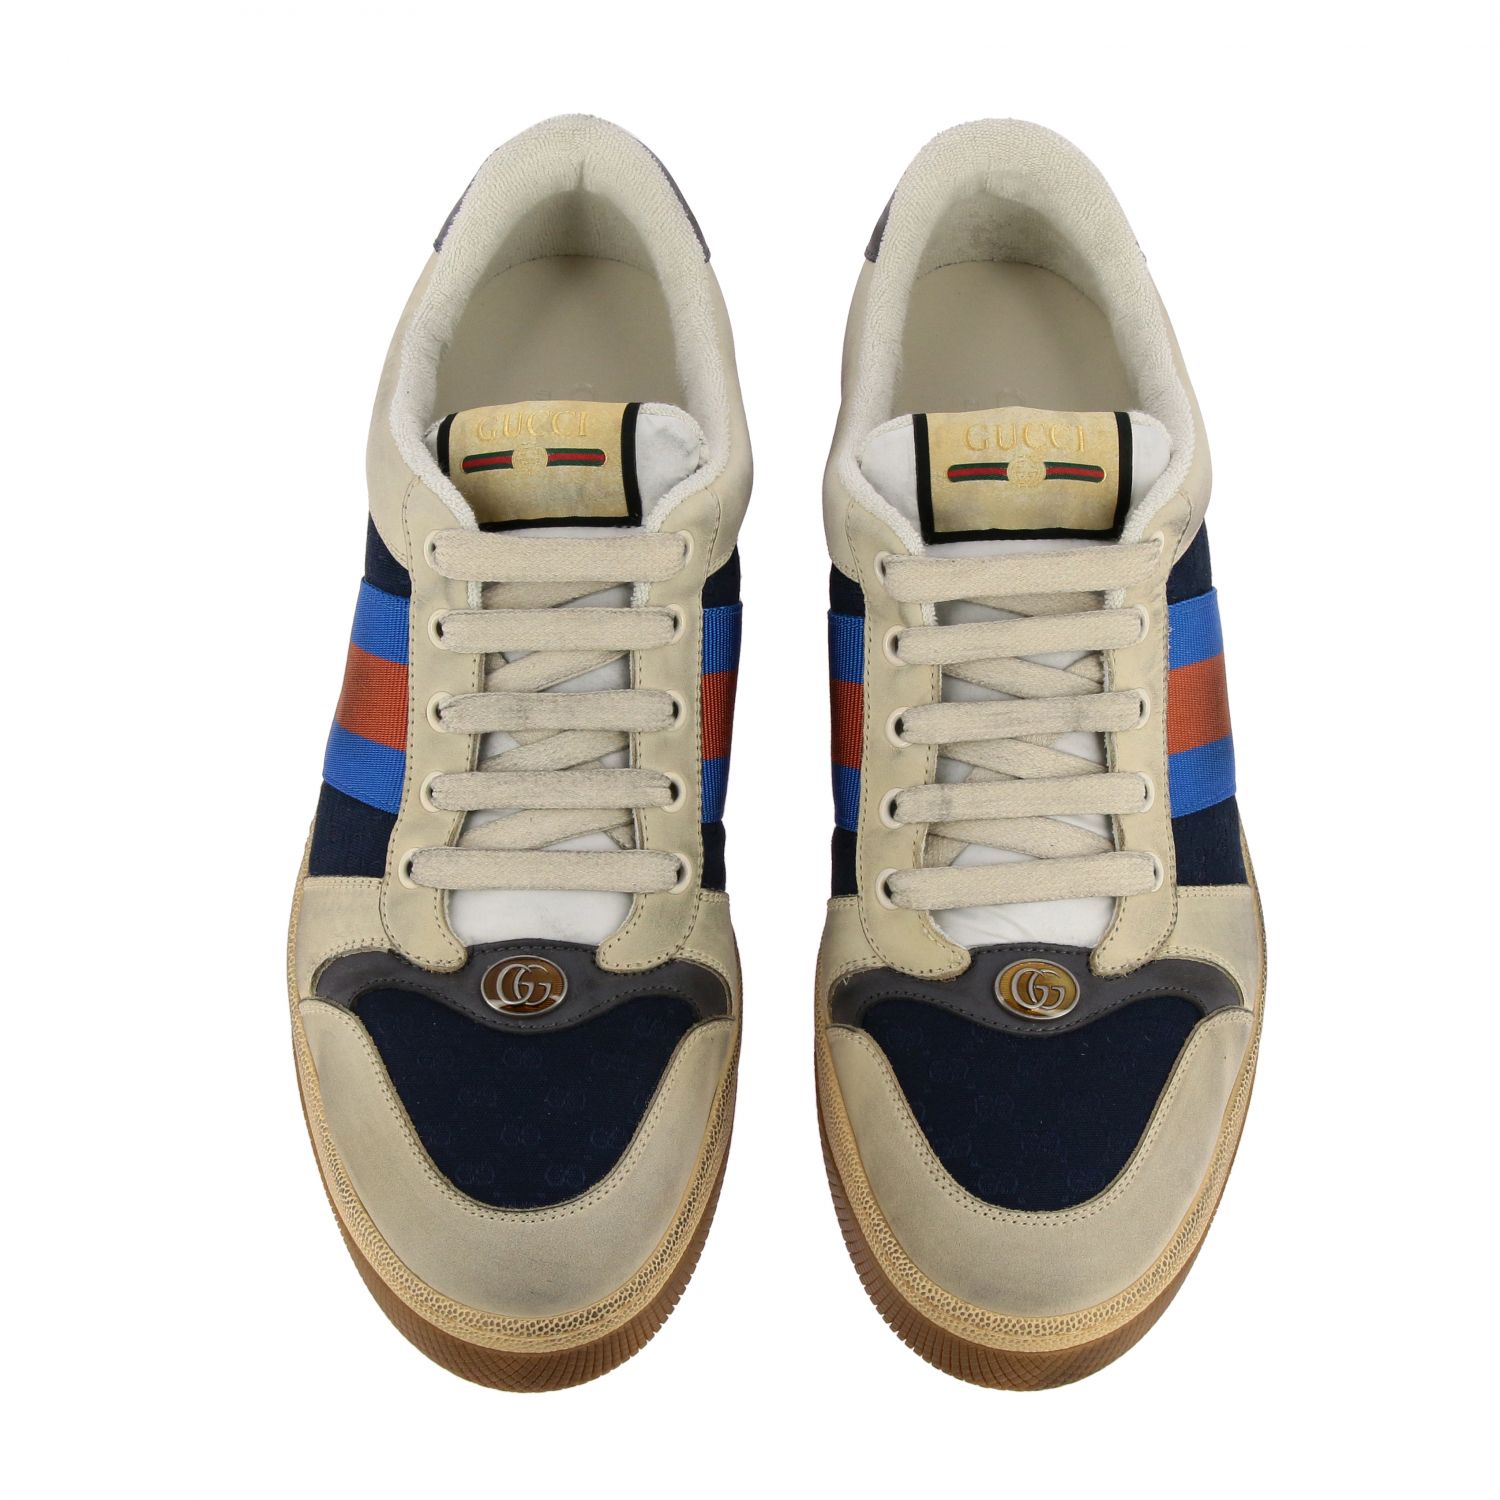 GUCCI: Shoes men | Sneakers Gucci Men Ivory | Sneakers Gucci 546551 ...